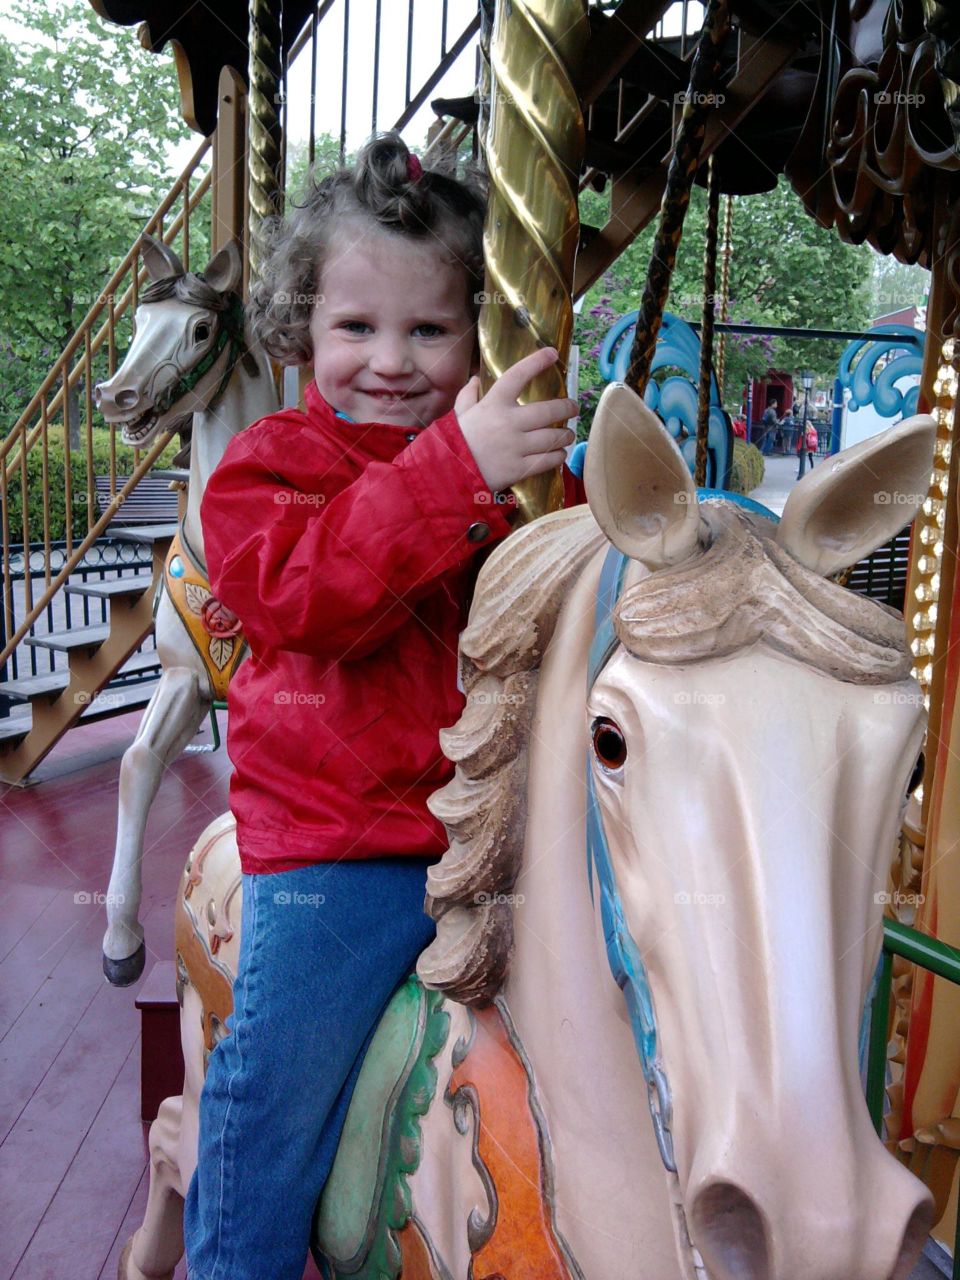 My beautiful little girl on a horse in the attraction park